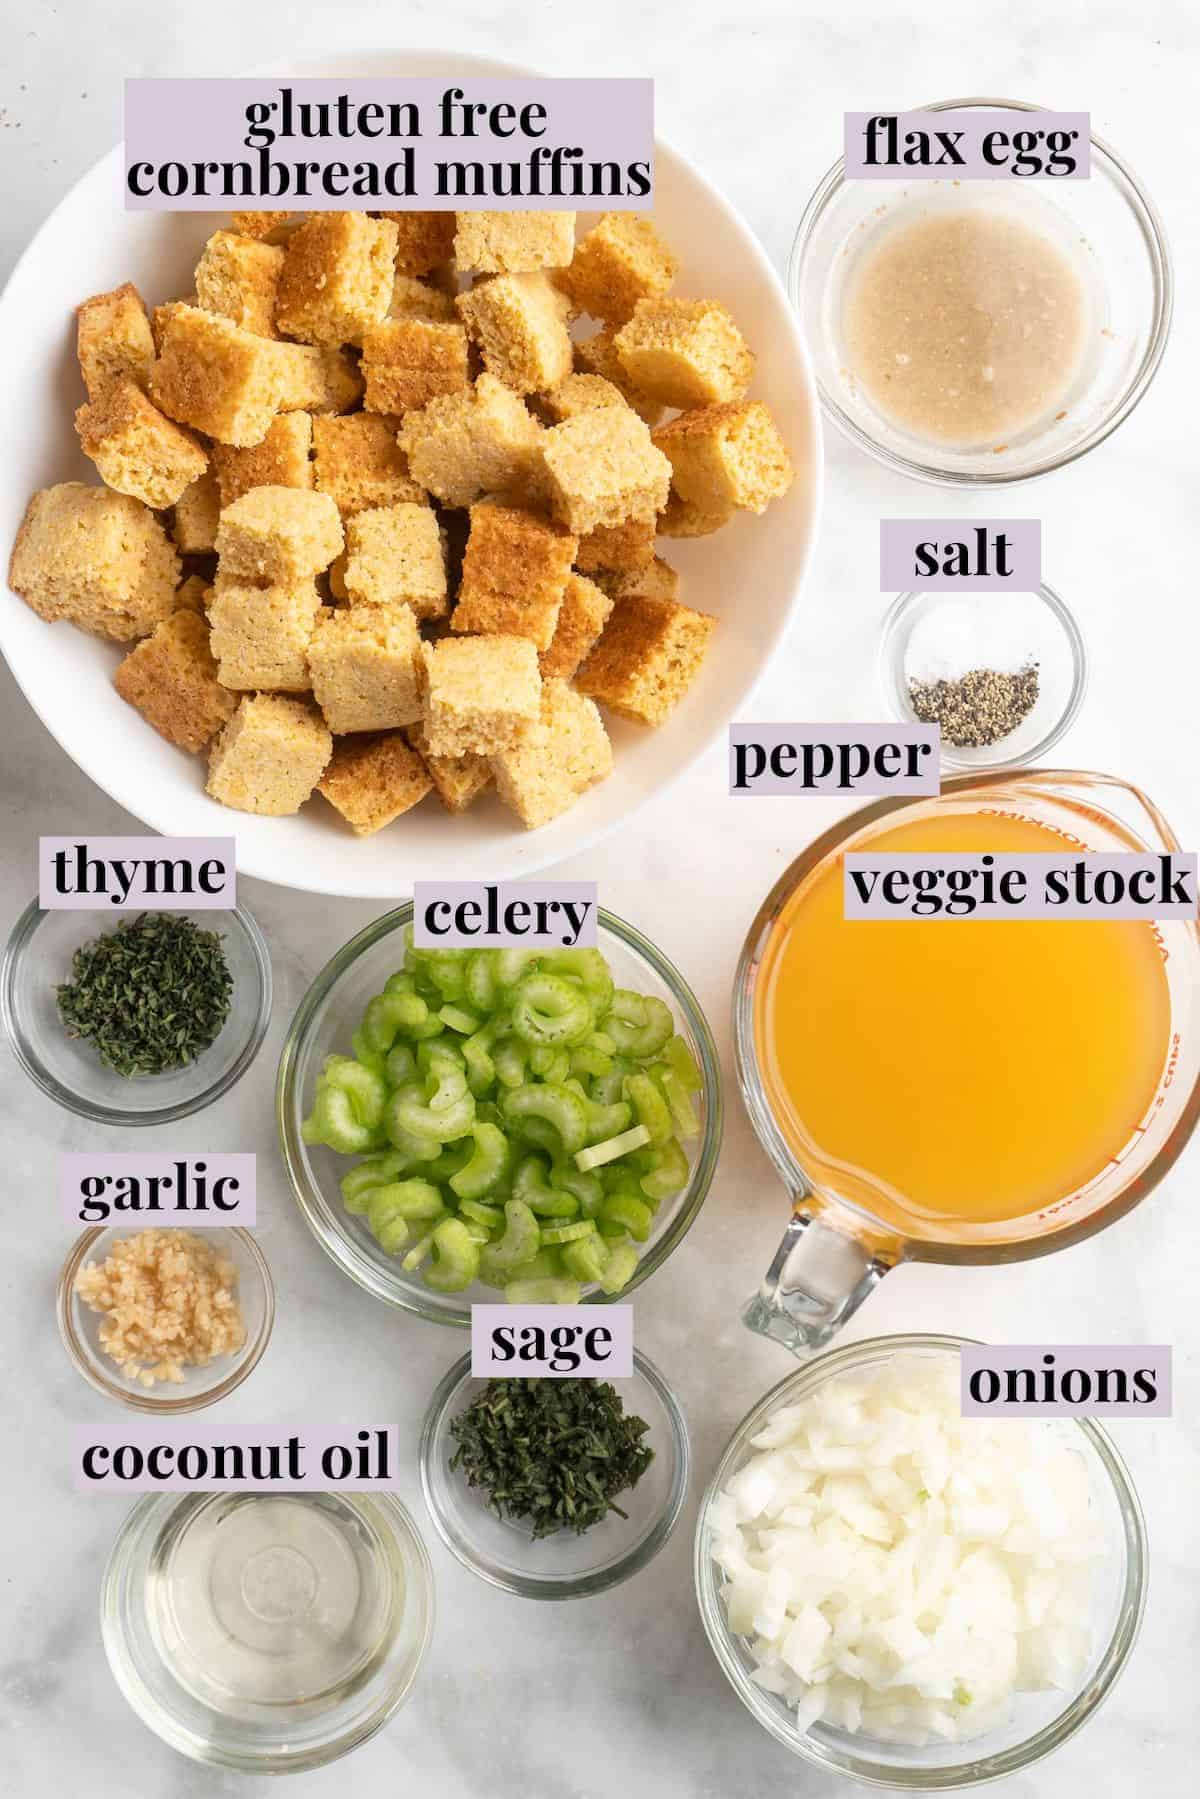 Overhead view of ingredients for cornbread stuffing with labels